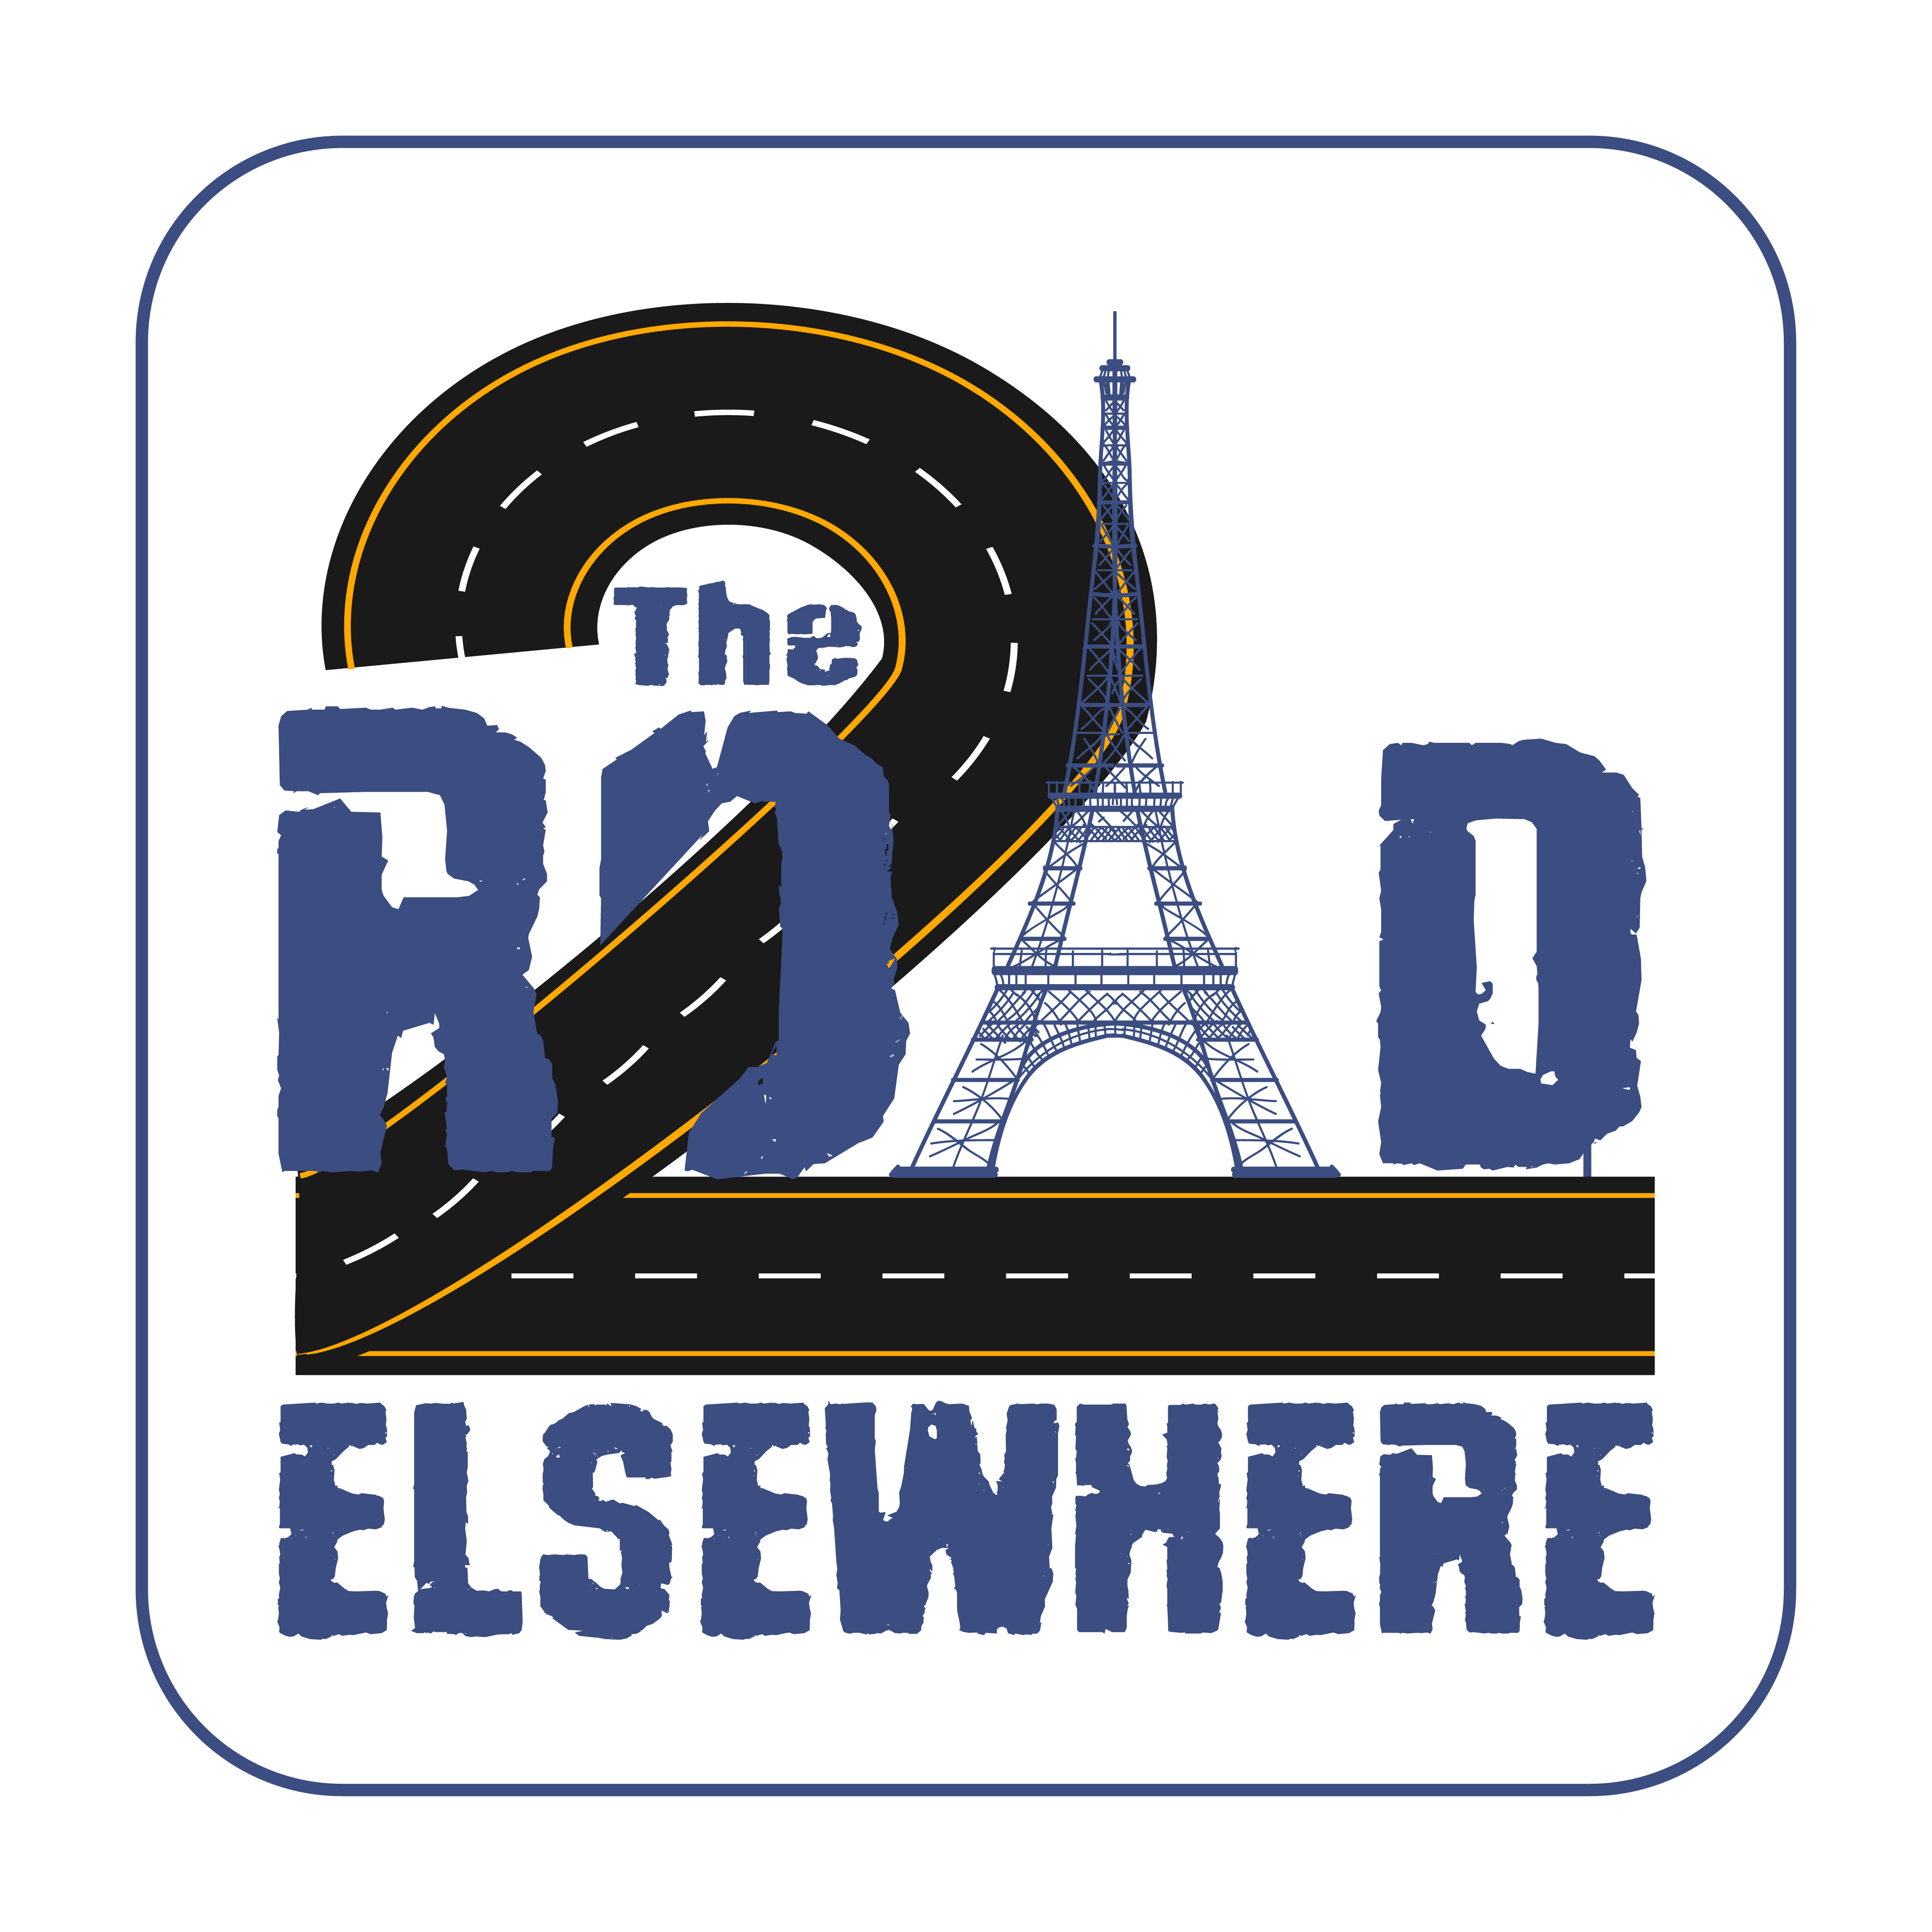 The Road 2 Elsewhere